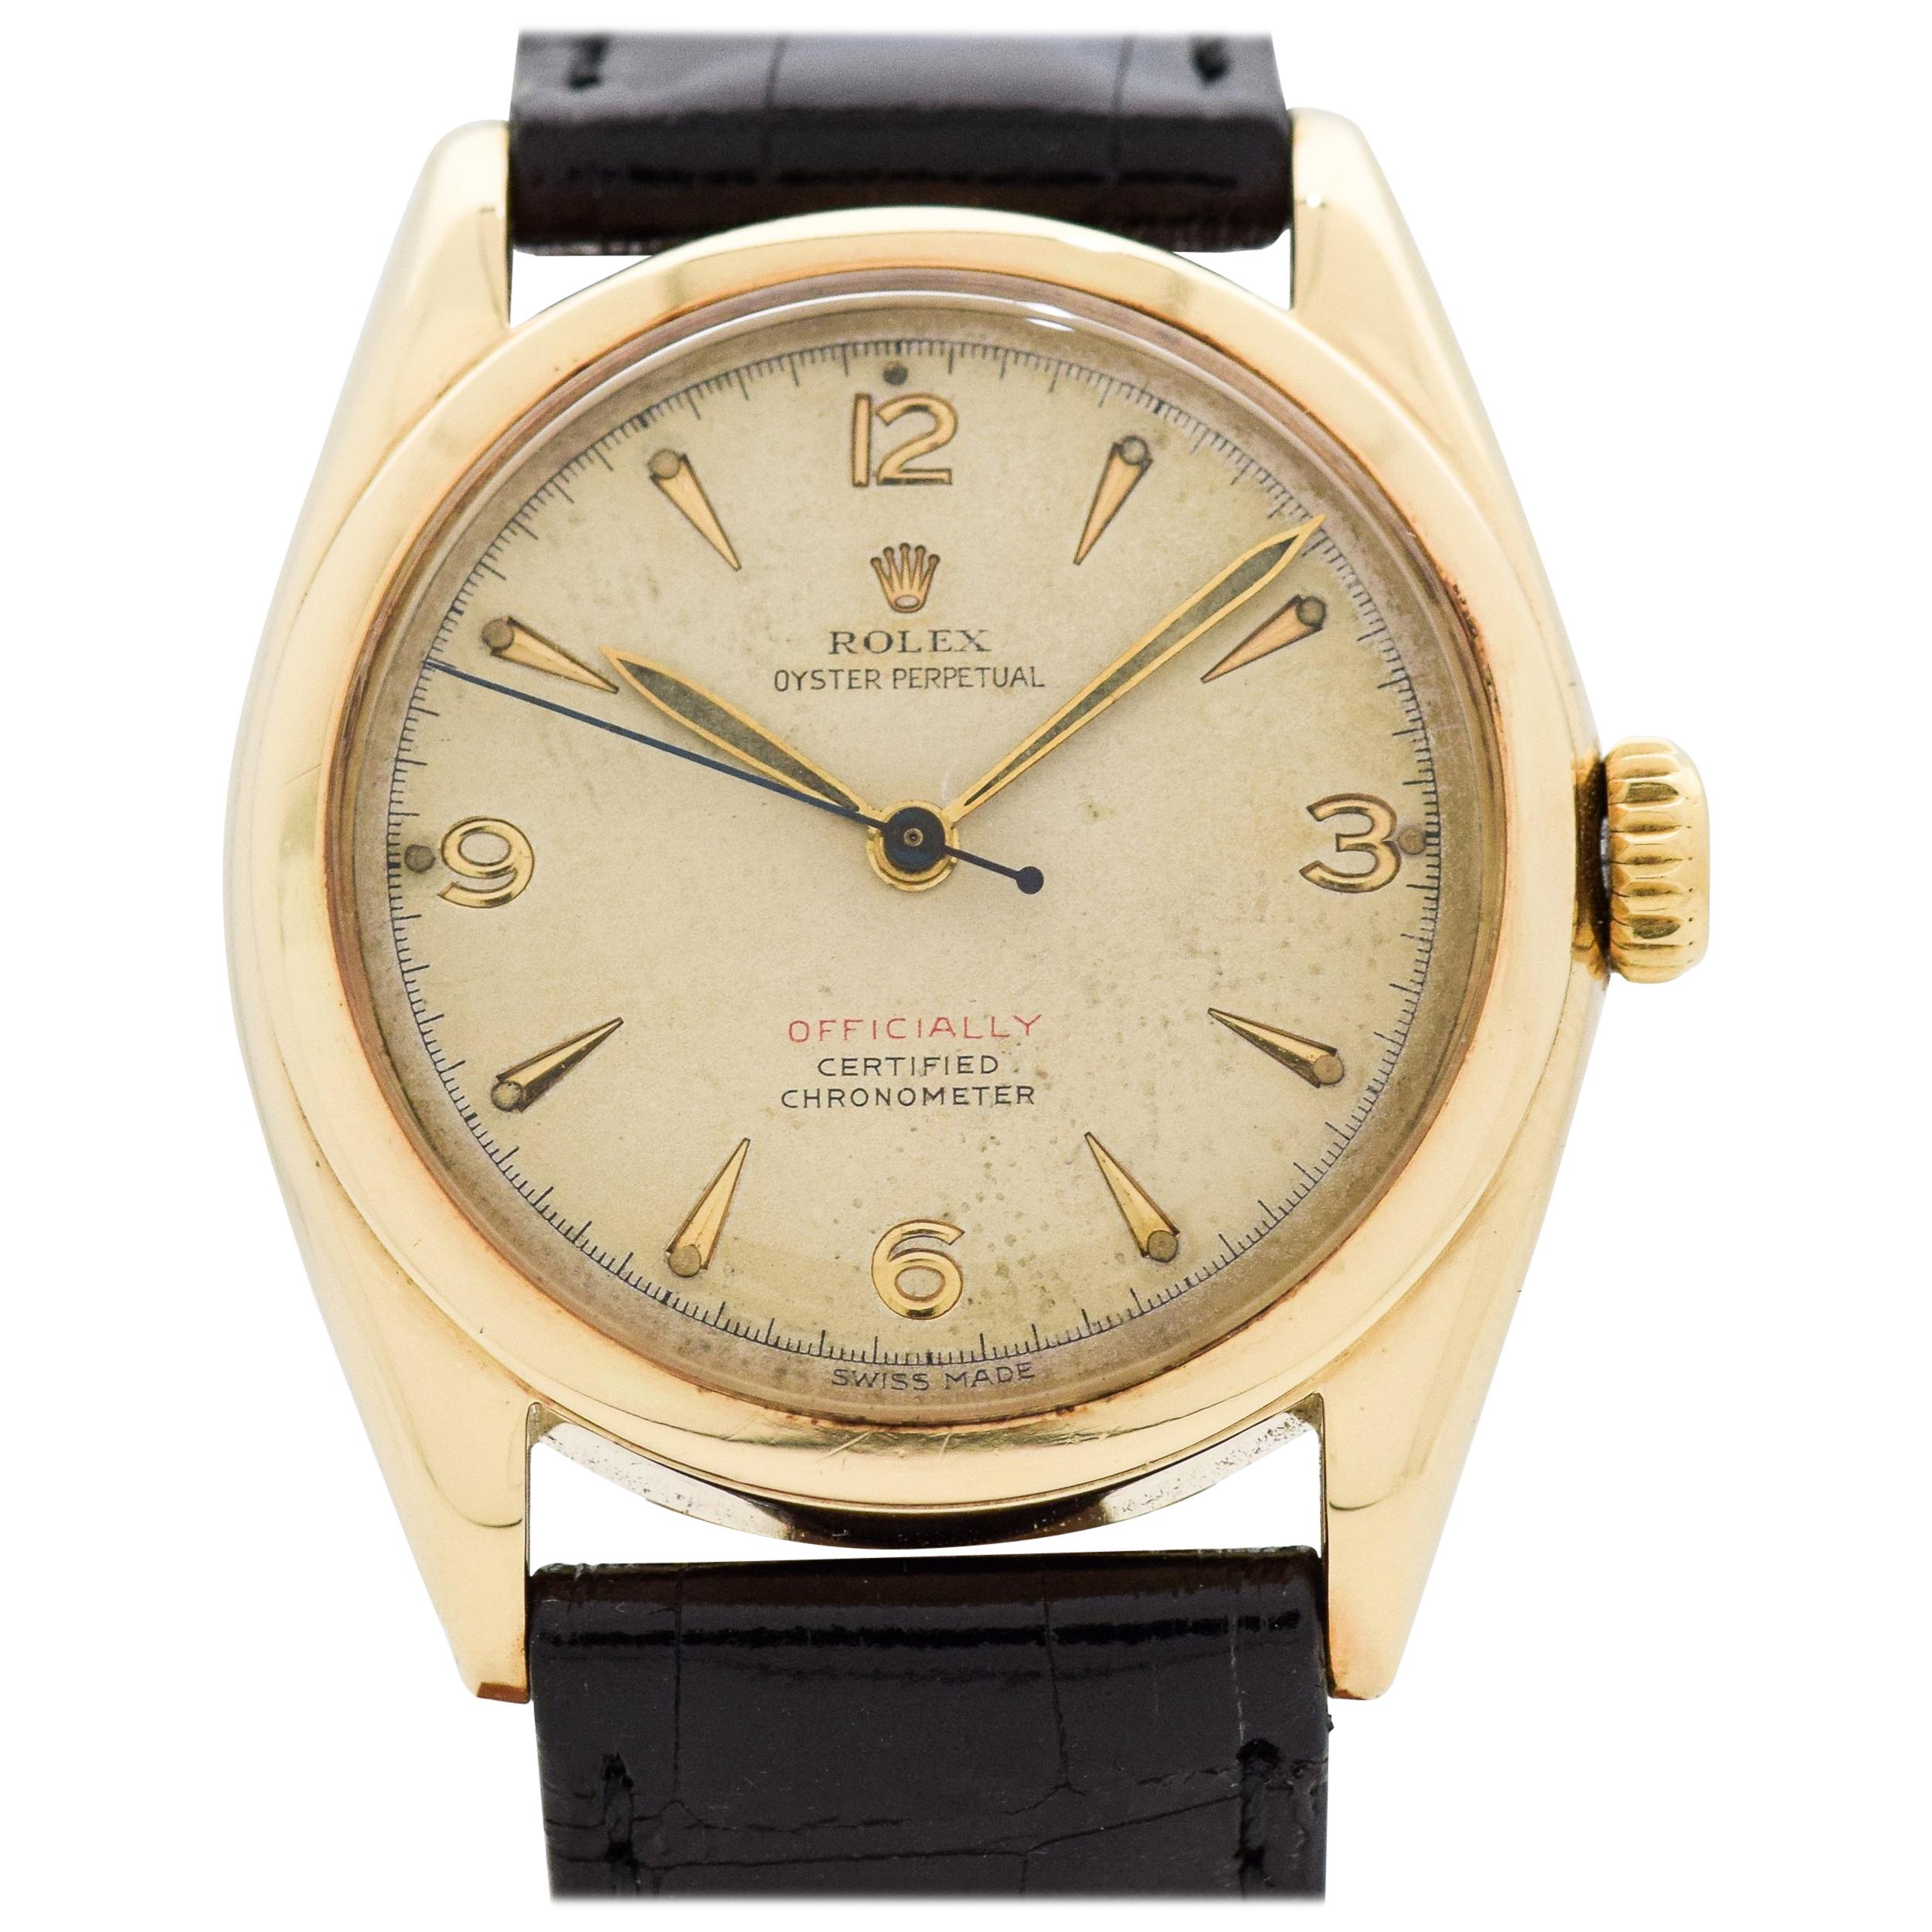 Vintage Rolex Oyster Perpetual Reference 6084 14 Karat Yellow Gold Watch, 1951